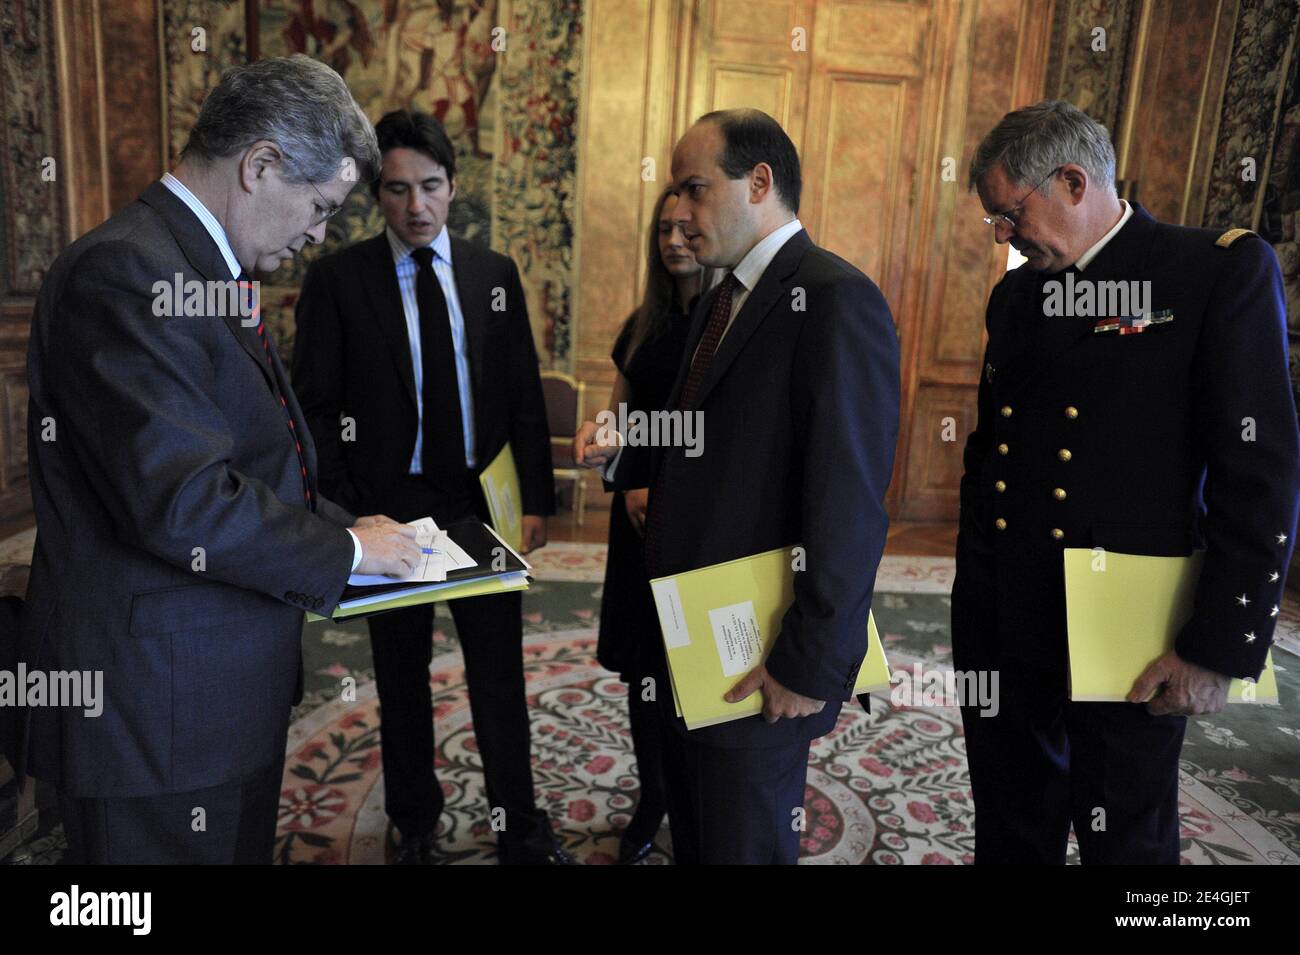 French President's diplomatic advisor and sherpa Jean-David Levitte speaks with Olivier Colom and French President's advisor technical at the diplomatic committee charged with Americas, Russia, the Caucasus, Balkans and the Central Asia Damien Loras during the visit of Brazilian President at the Elysee presidential Palace in Paris, France on November 14, 2009. Lula arrived in Europe on November 14 to attend a UN food agency meeting in Rome and discuss climate change and military jets in Paris, to boost Brazil's air force's capabilities of patrolling the Amazon and offshore oil fields. Photo by Stock Photo